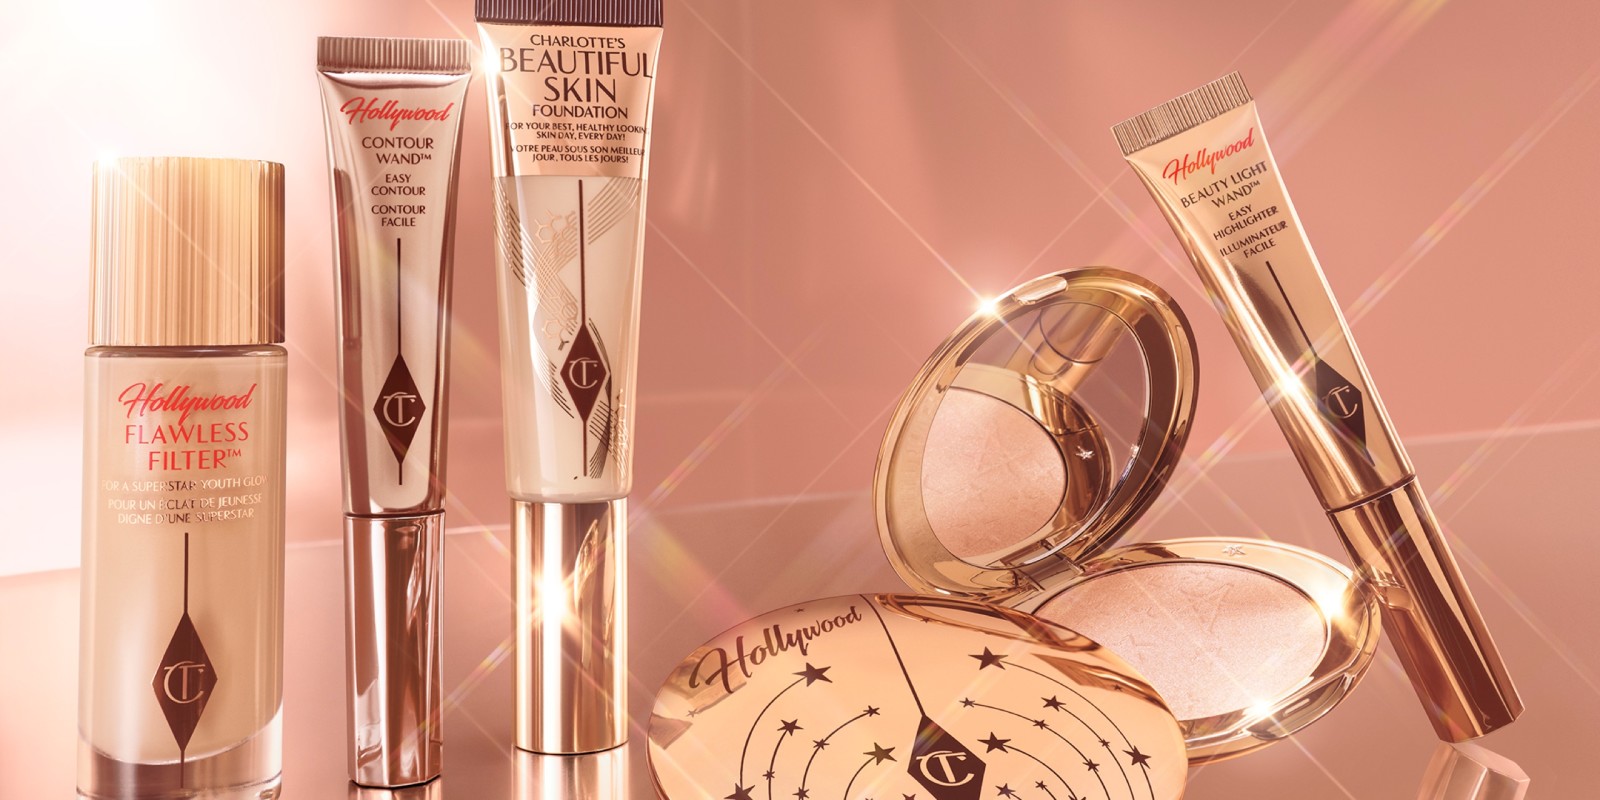 An assortment of complexion products by Charlotte Tilbury.